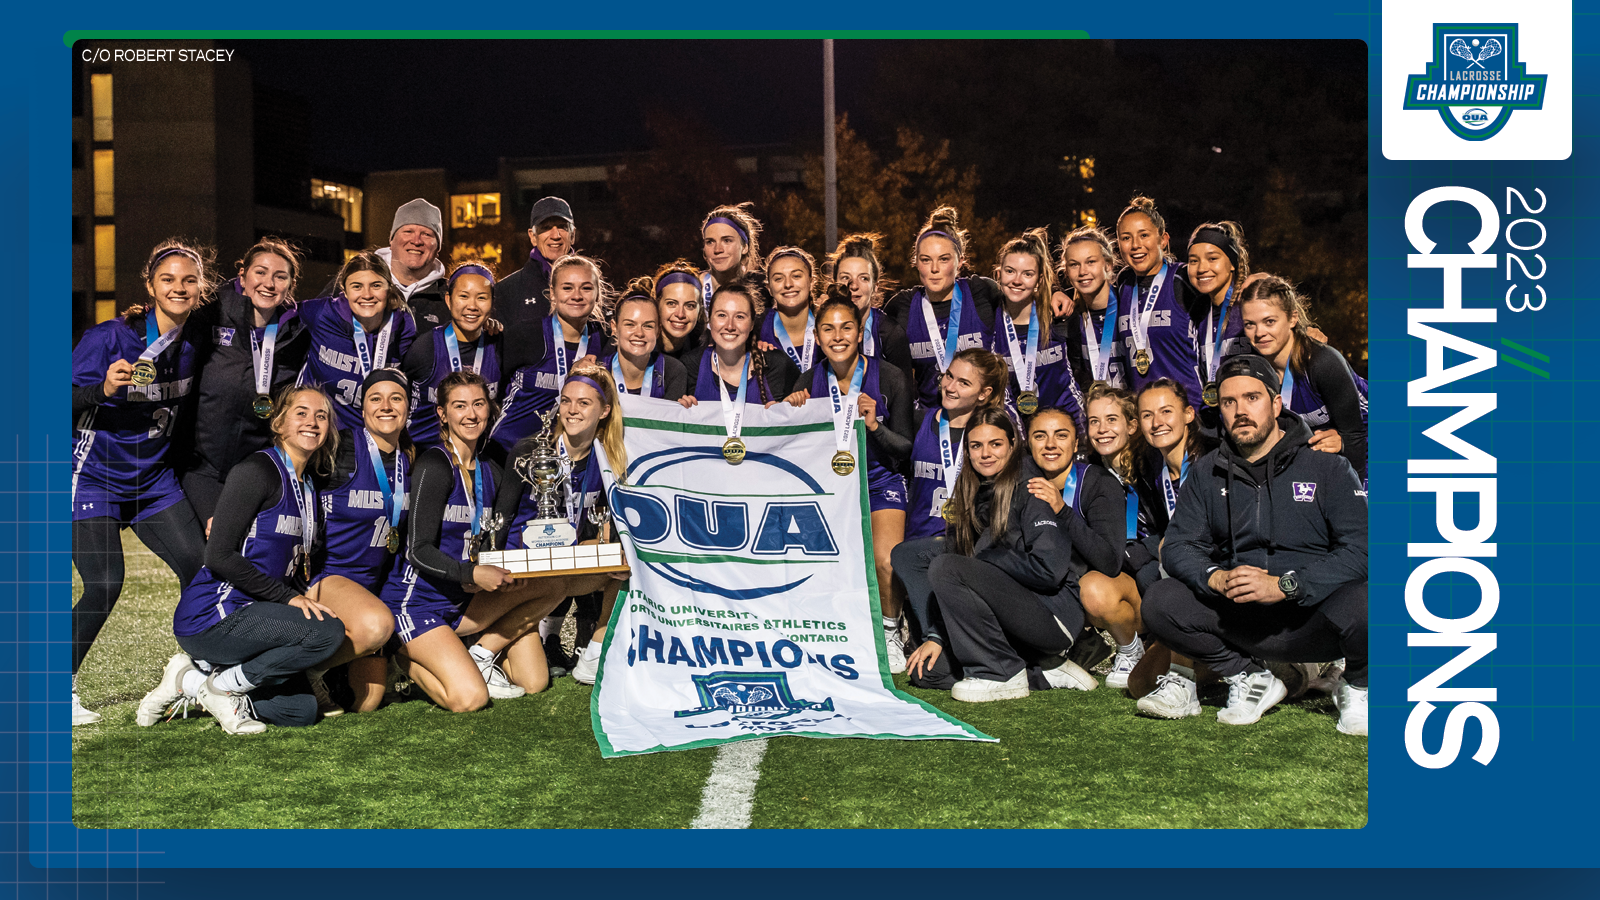 Predominantly blue graphic covered mostly by 2023 OUA Lacrosse Championship banner photo, with the corresponding championship logo and white text reading '2023 Champions' on the right side